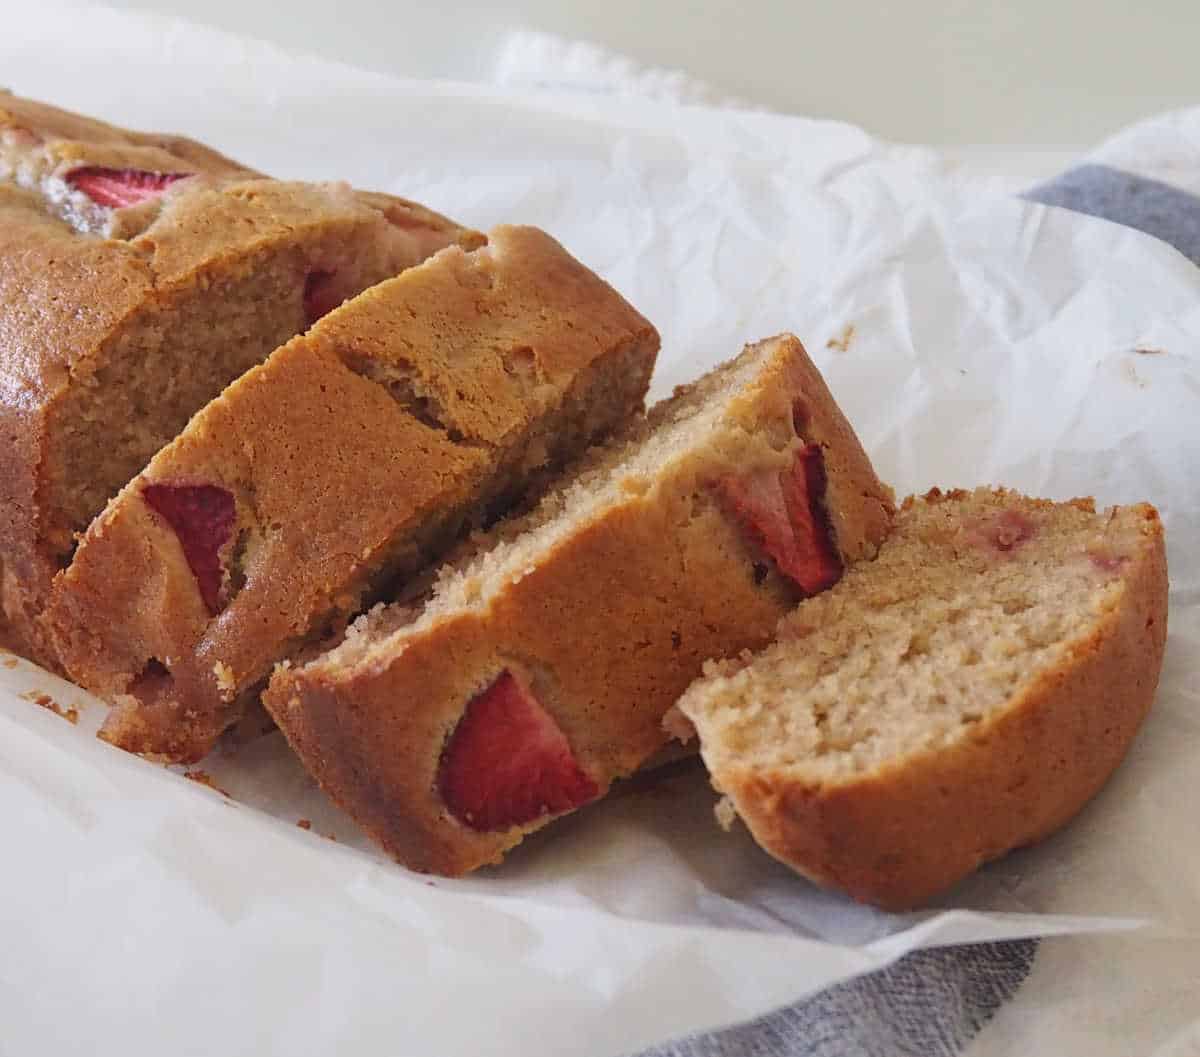 Side view of sliced Banana and Strawberry Bread.